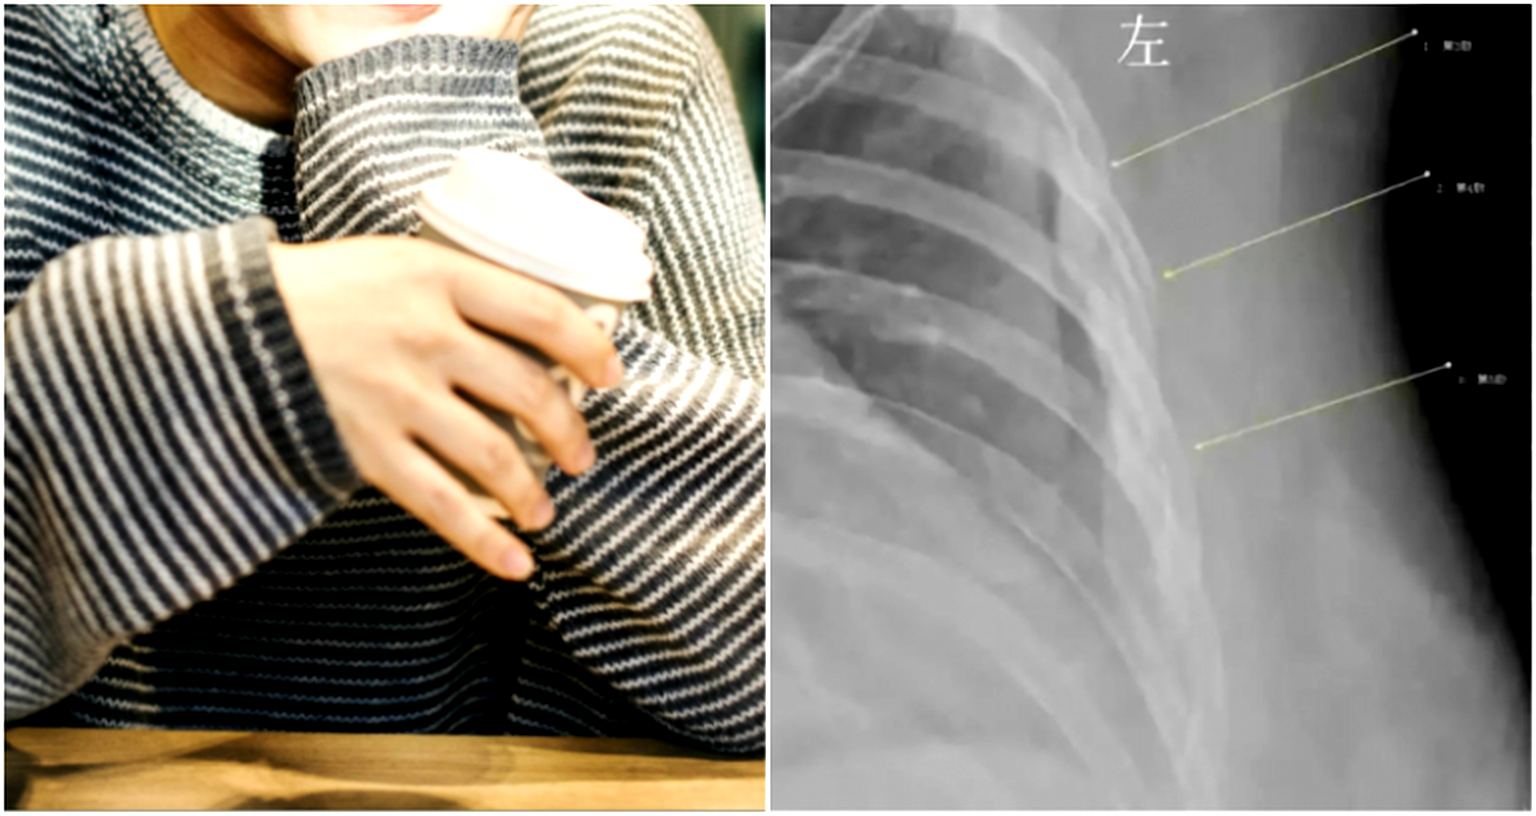 Chinese Woman Who Drank 10 CUPS of Coffee a Day for 7 Years Now Has the Bones of a Grandma